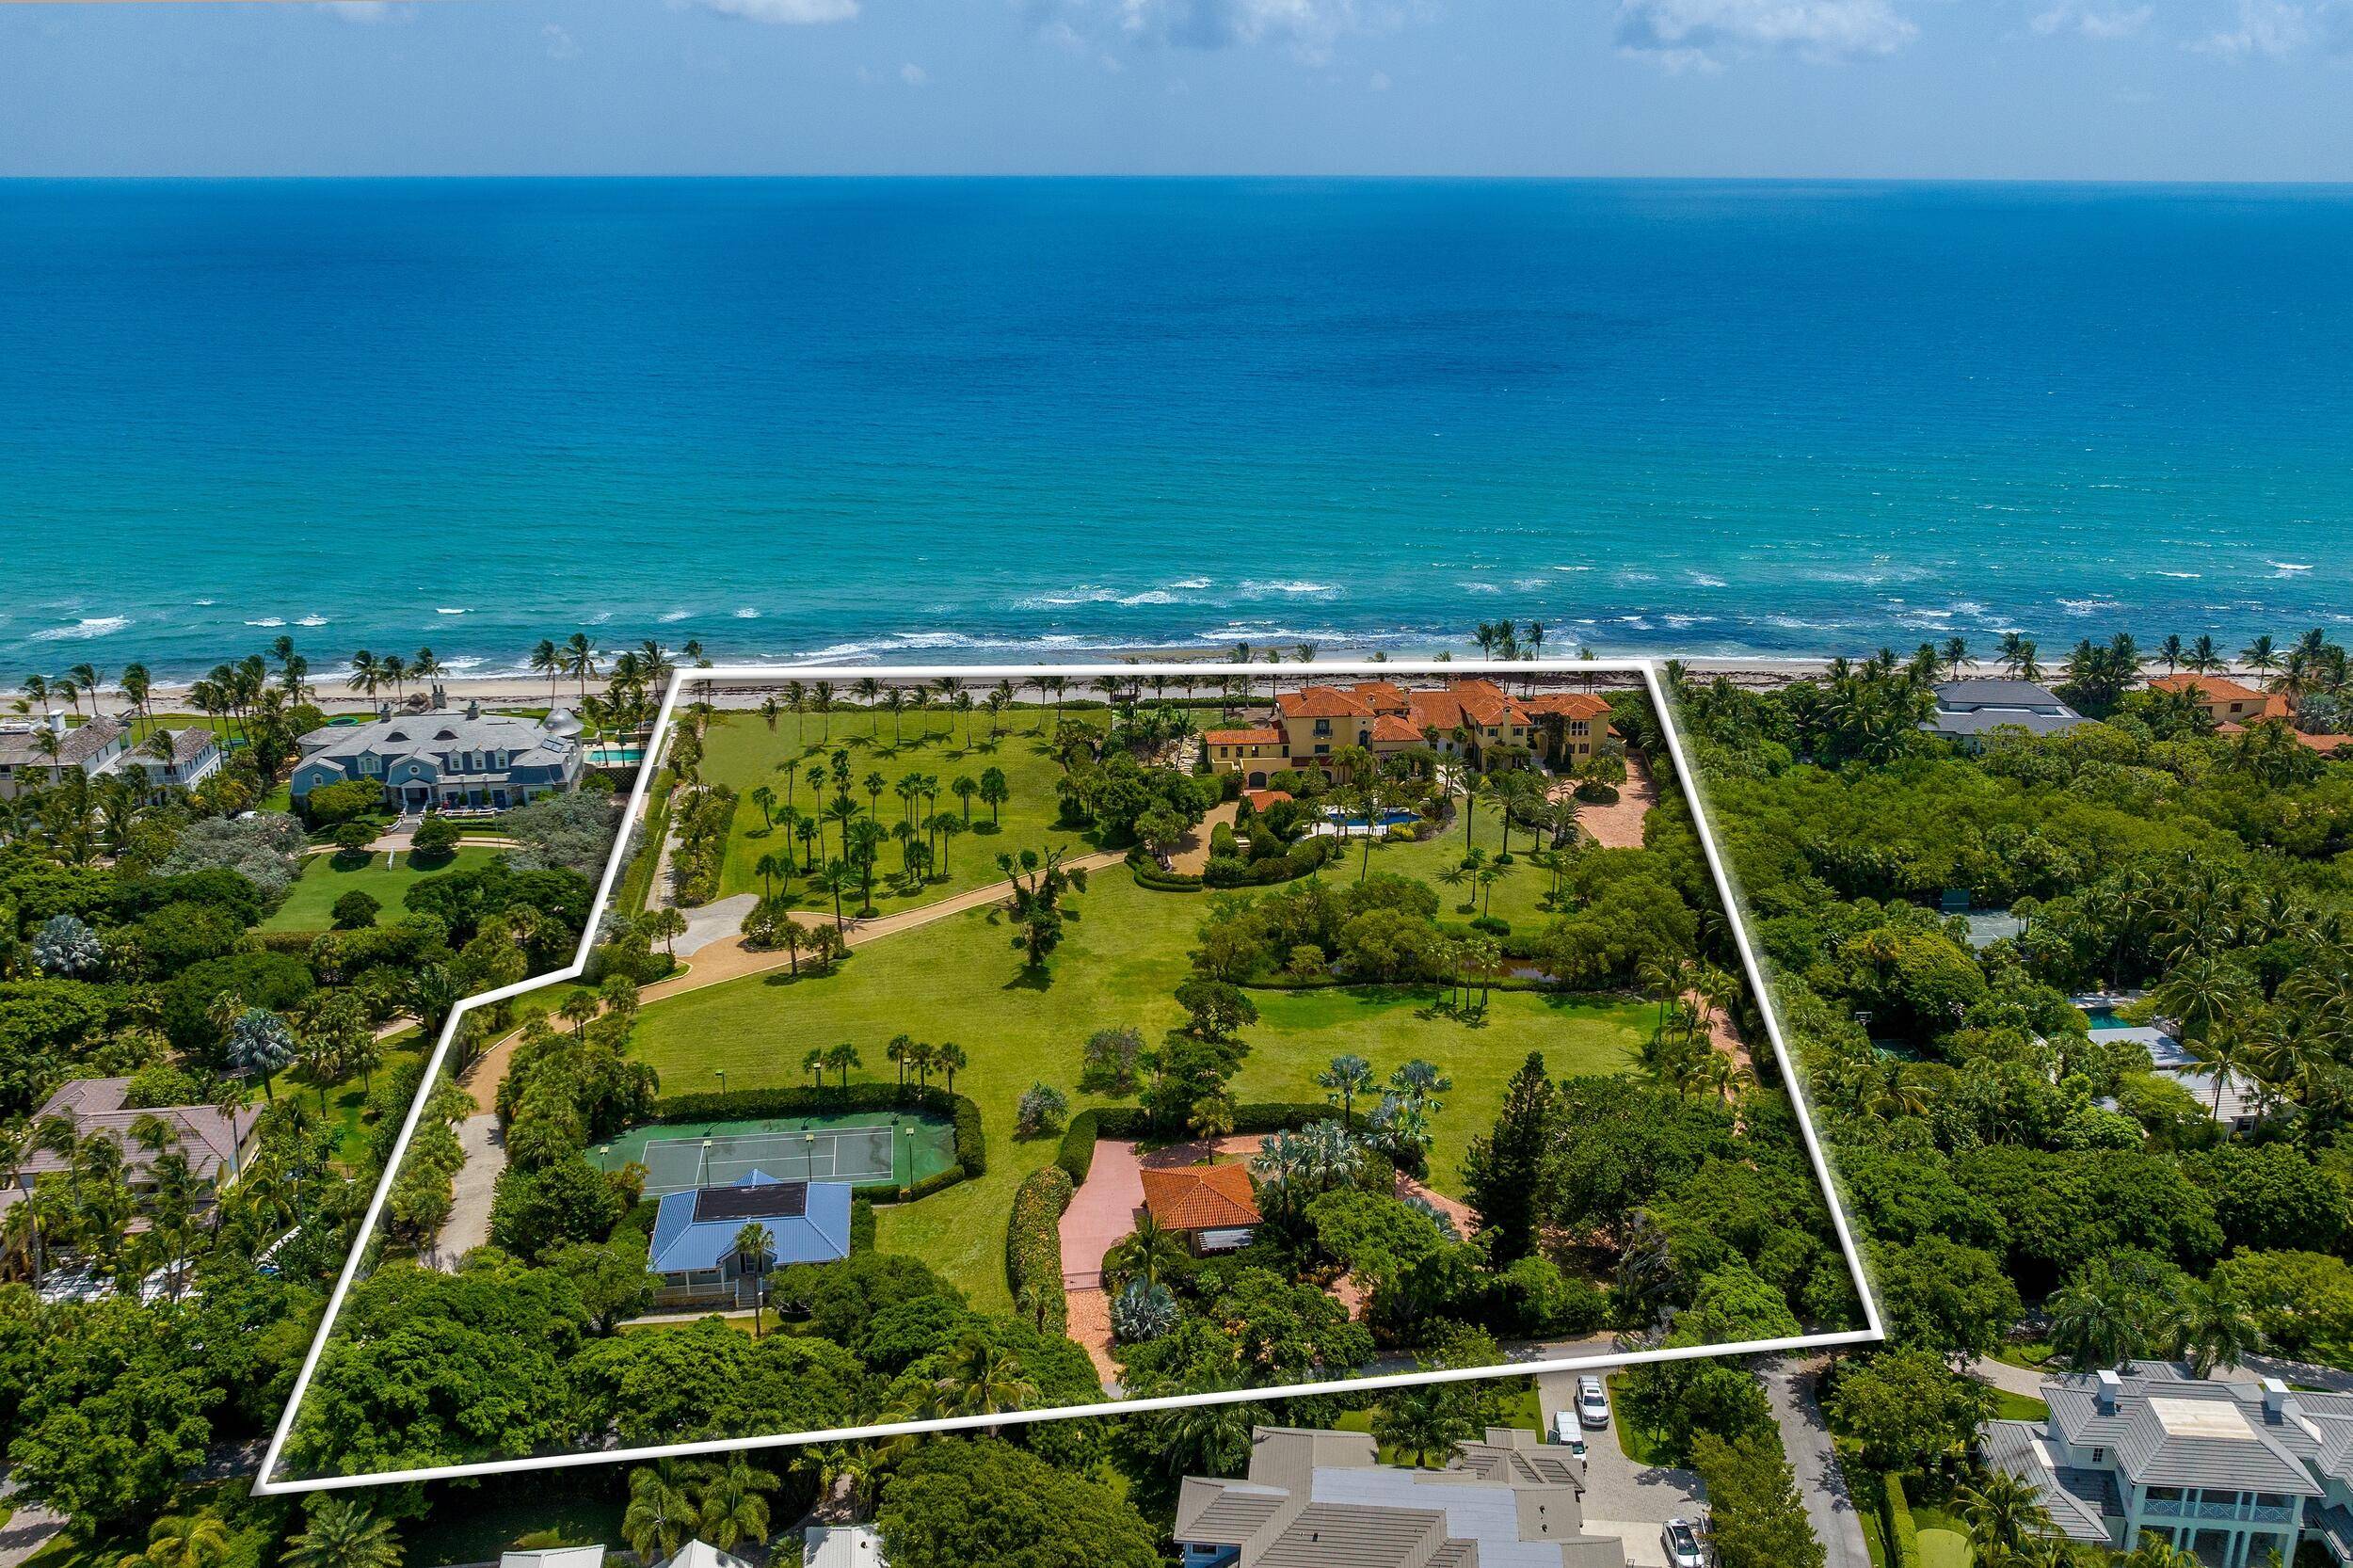 Introducing 12210 Banyan Road, the largest Oceanfront parcel on the market in South Florida.